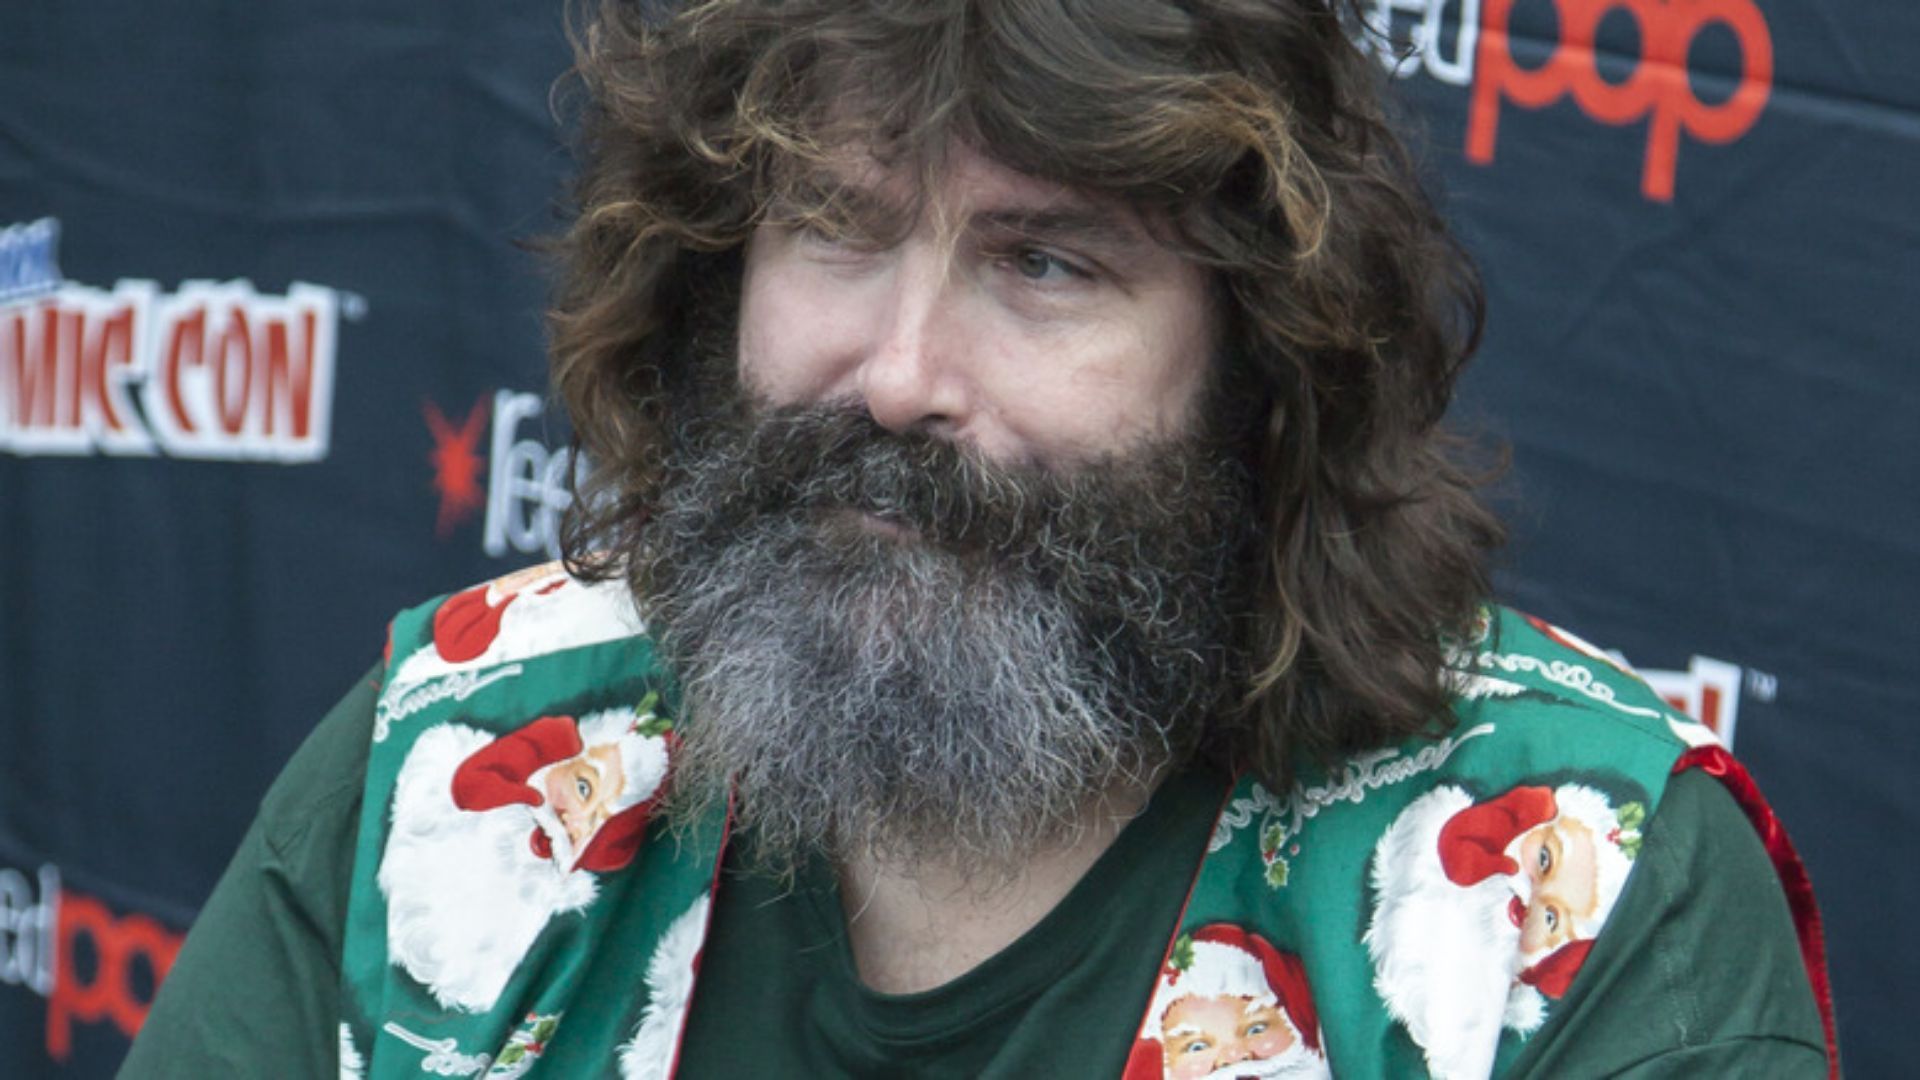 Mick Foley is a true legend of the wrestling business